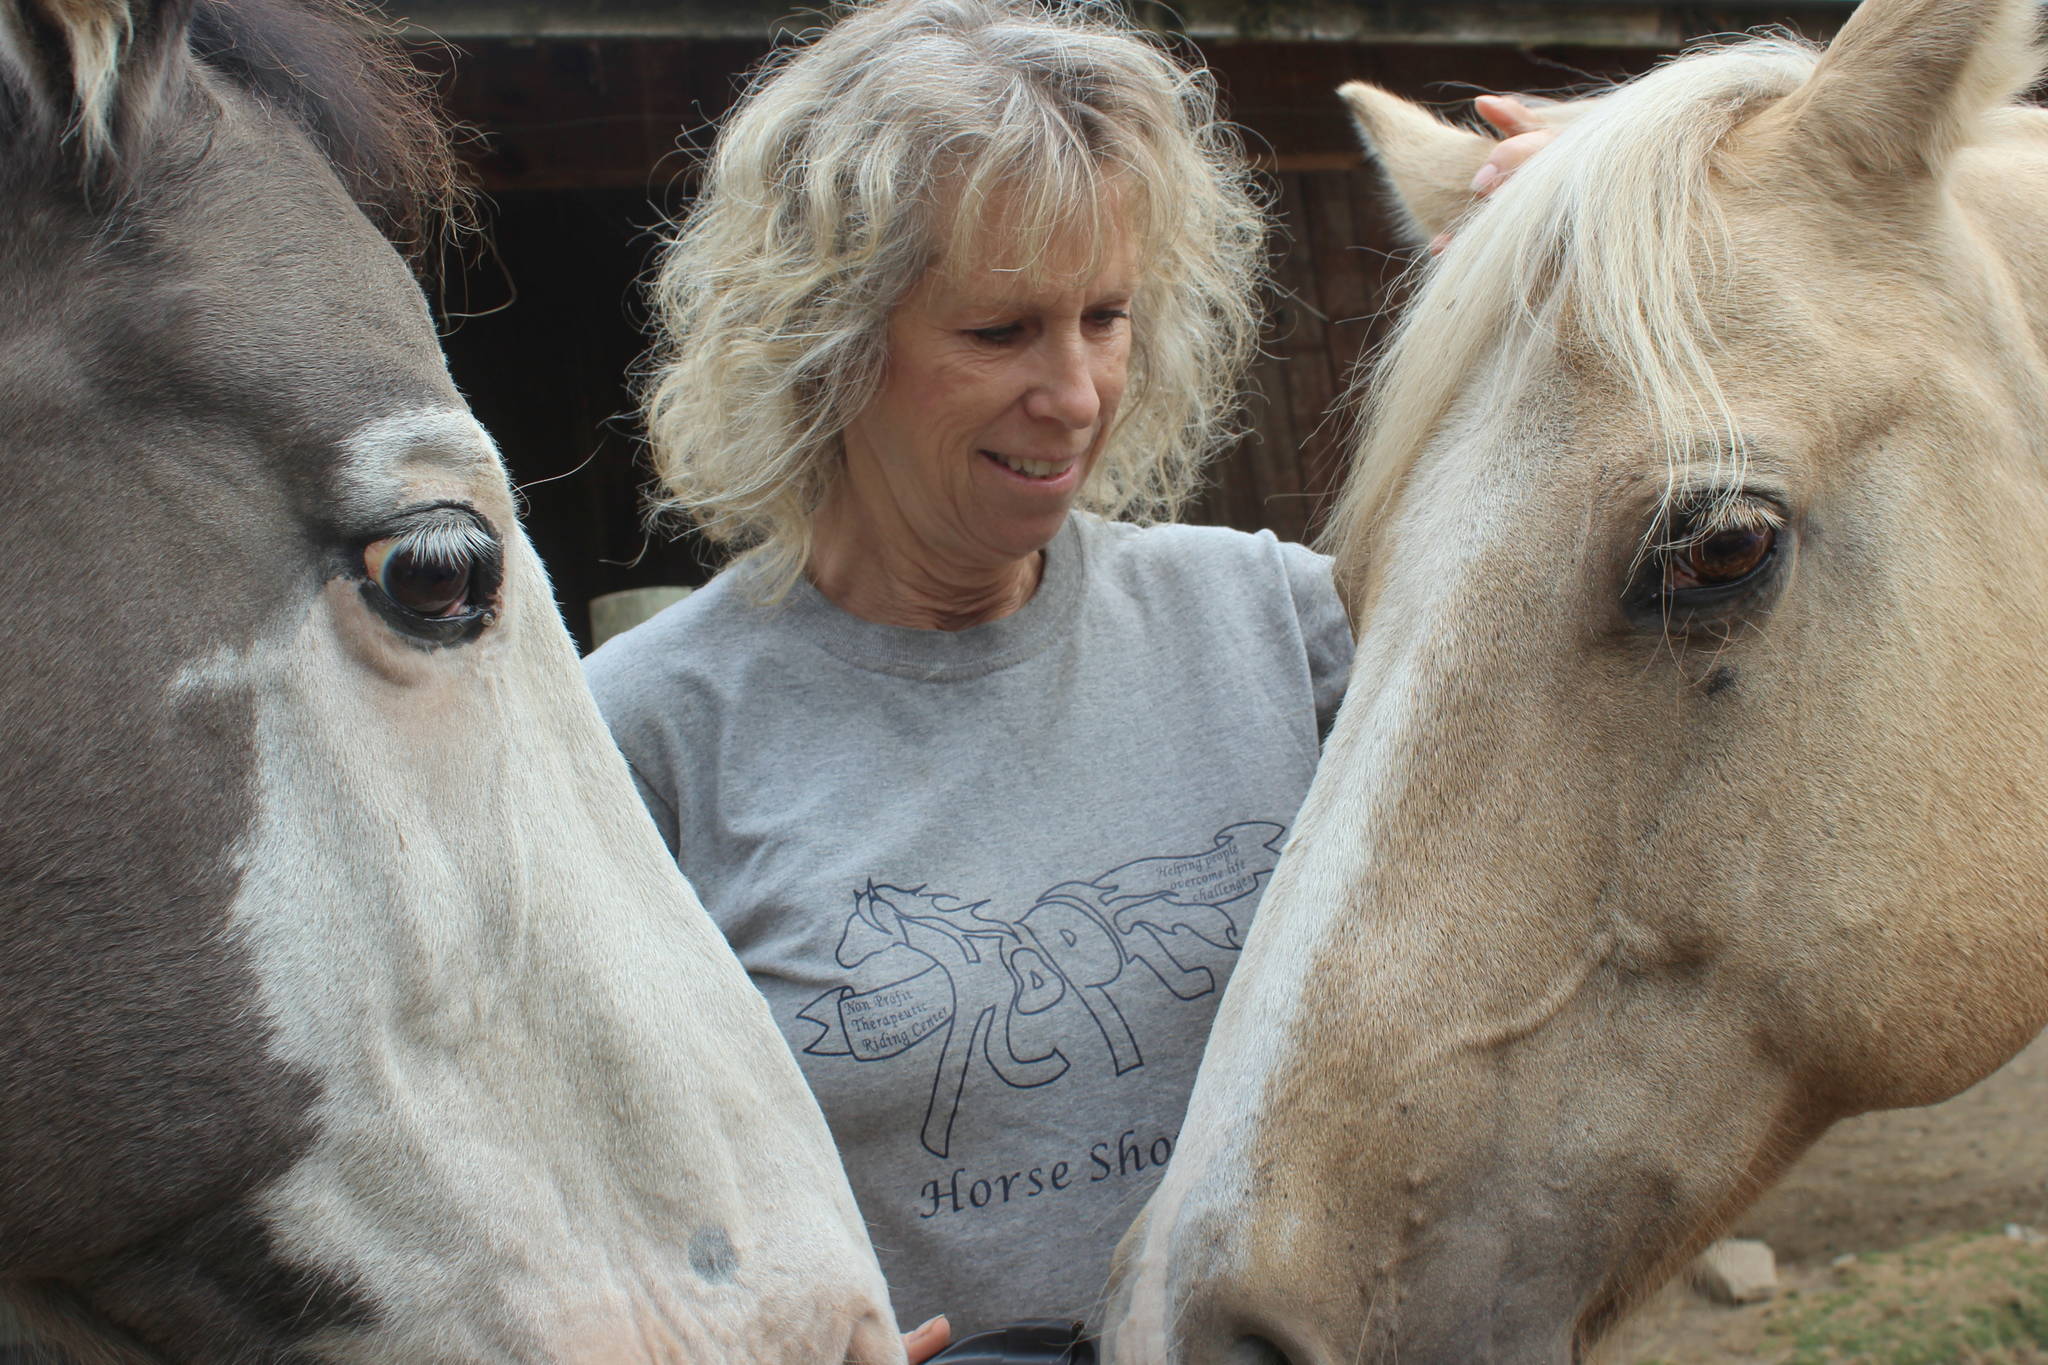 Marta Berry, board president at HOPE foundation, shows off Dusty, right, and Ryan, who will potentially become part of the HOPE family with proceeds from the Big Barn Bash fundraiser on Nov. 9. Photo by Wendy Leigh / South Whidbey Record